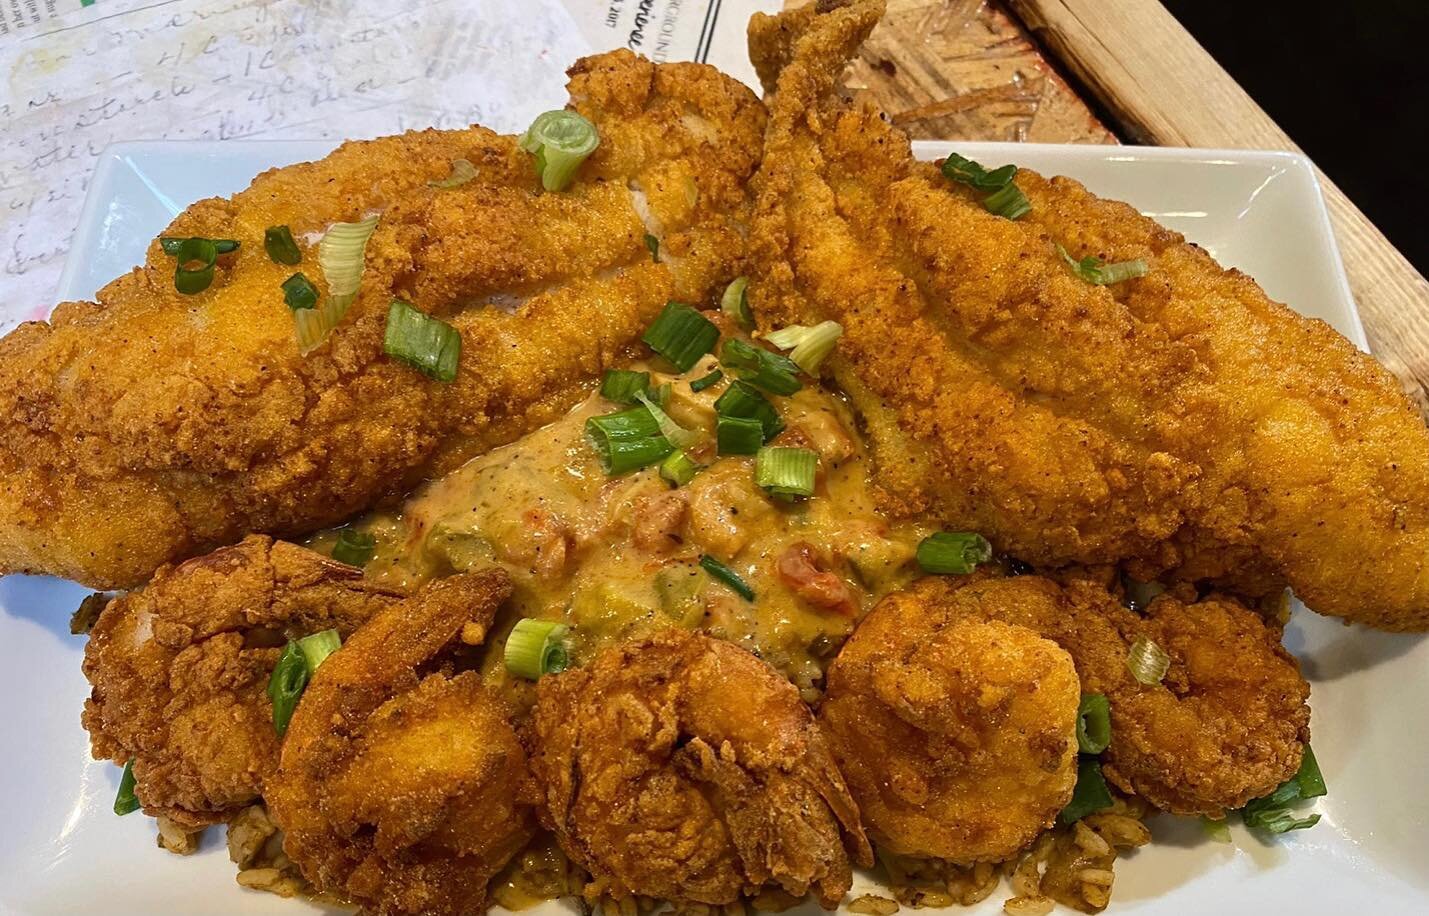 Chicken dish from Chef Tam's Underground Cafe. Chef Tam's is one of 21 businesses participating in the 2021 Memphis Black Restaurant Week running March 7-14. (Submitted)